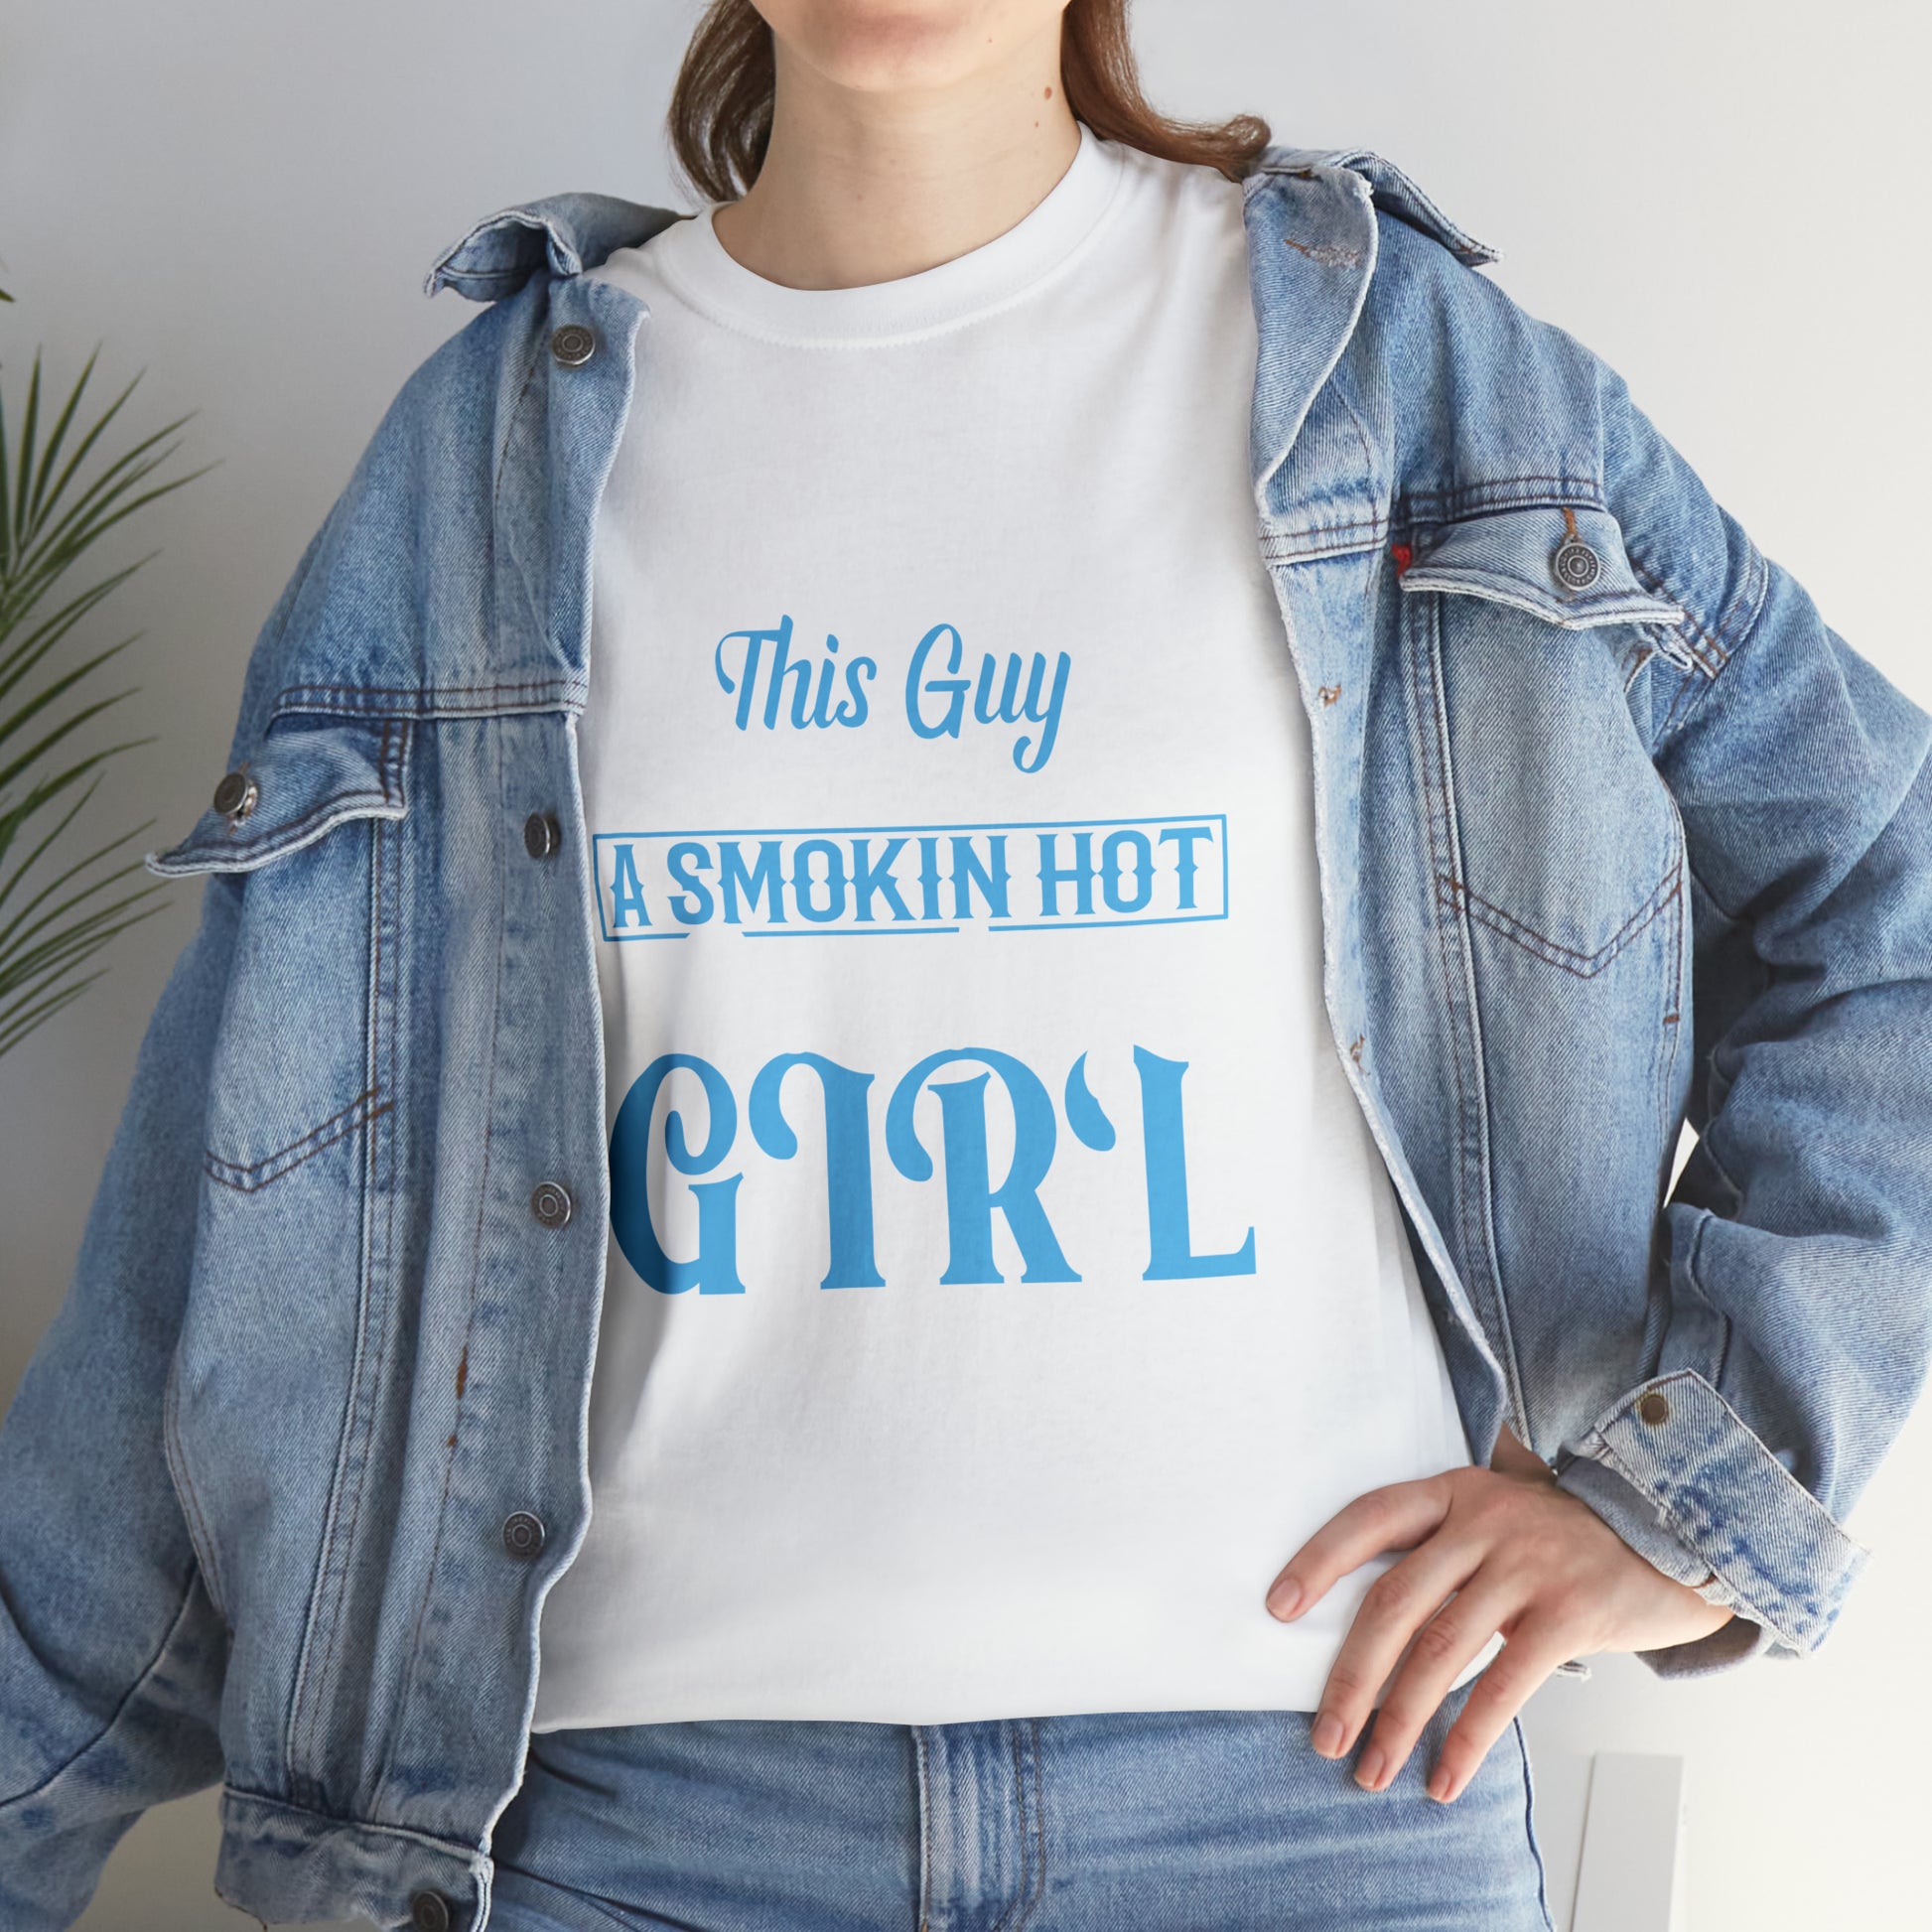 "This Guys Is Taken" Men's T-Shirt - Weave Got Gifts - Unique Gifts You Won’t Find Anywhere Else!